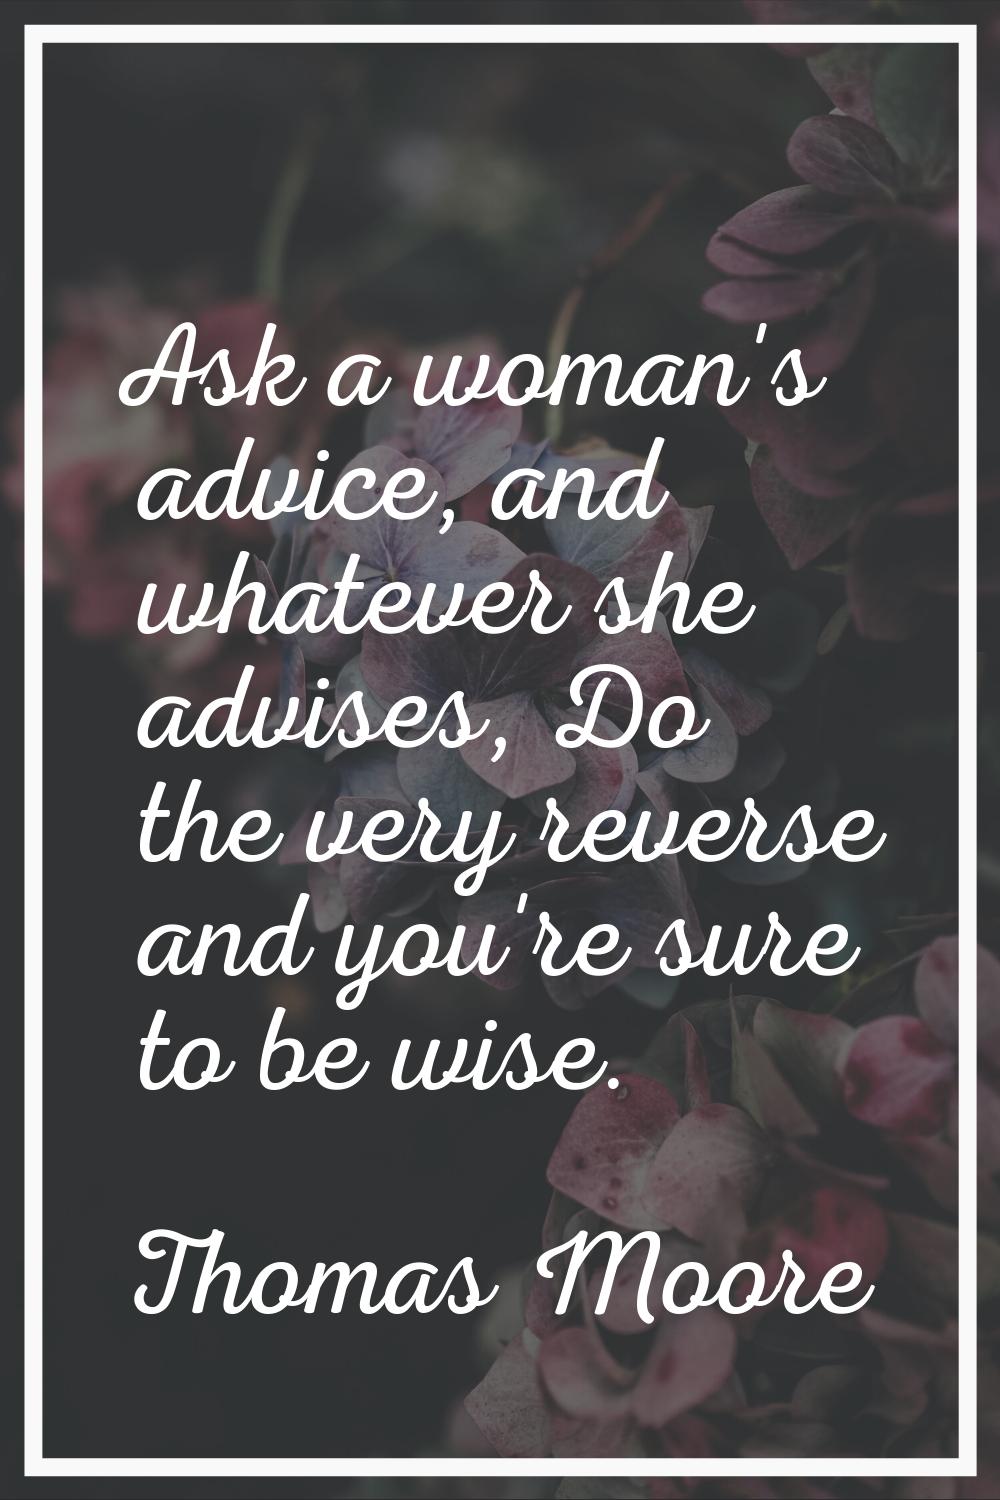 Ask a woman's advice, and whatever she advises, Do the very reverse and you're sure to be wise.